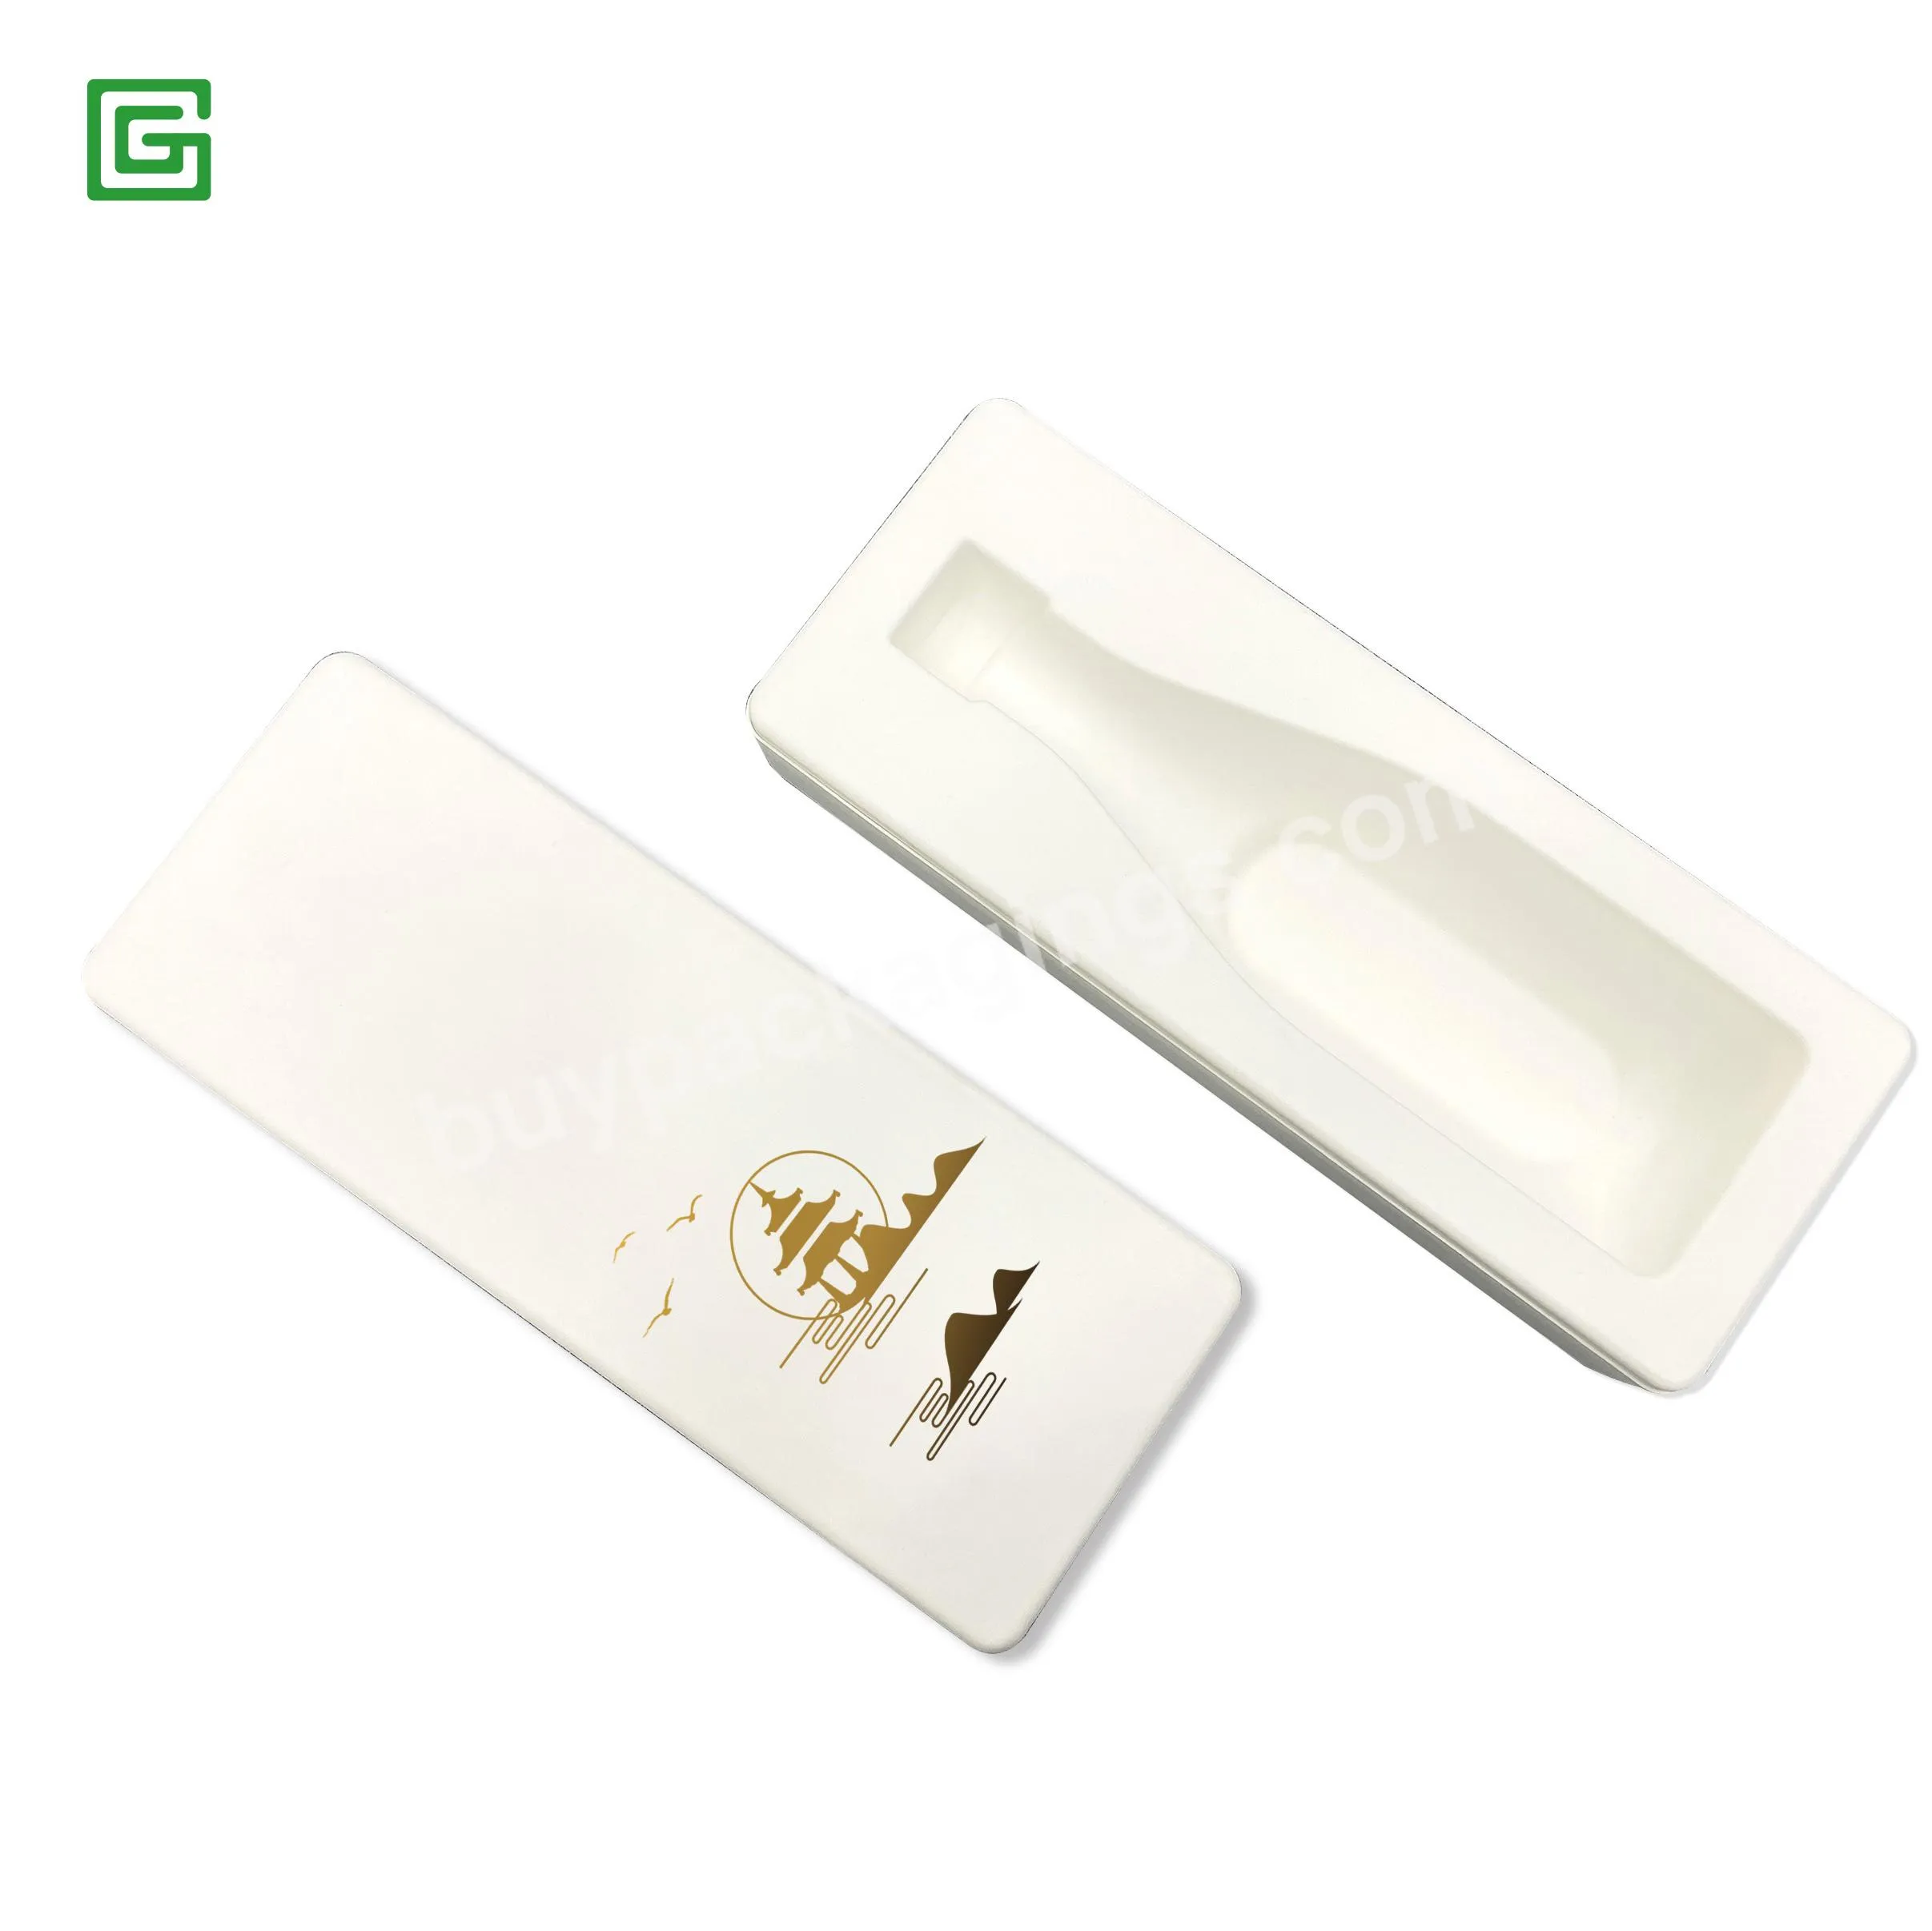 Wholesale Biodegradable Bagasse Paper Tray Molded Pulp Packaging Box For Wine - Buy Eco-friendly Packaging For Wine,Wine Gift Box Packaging,Fiber Molded Box And Tray.